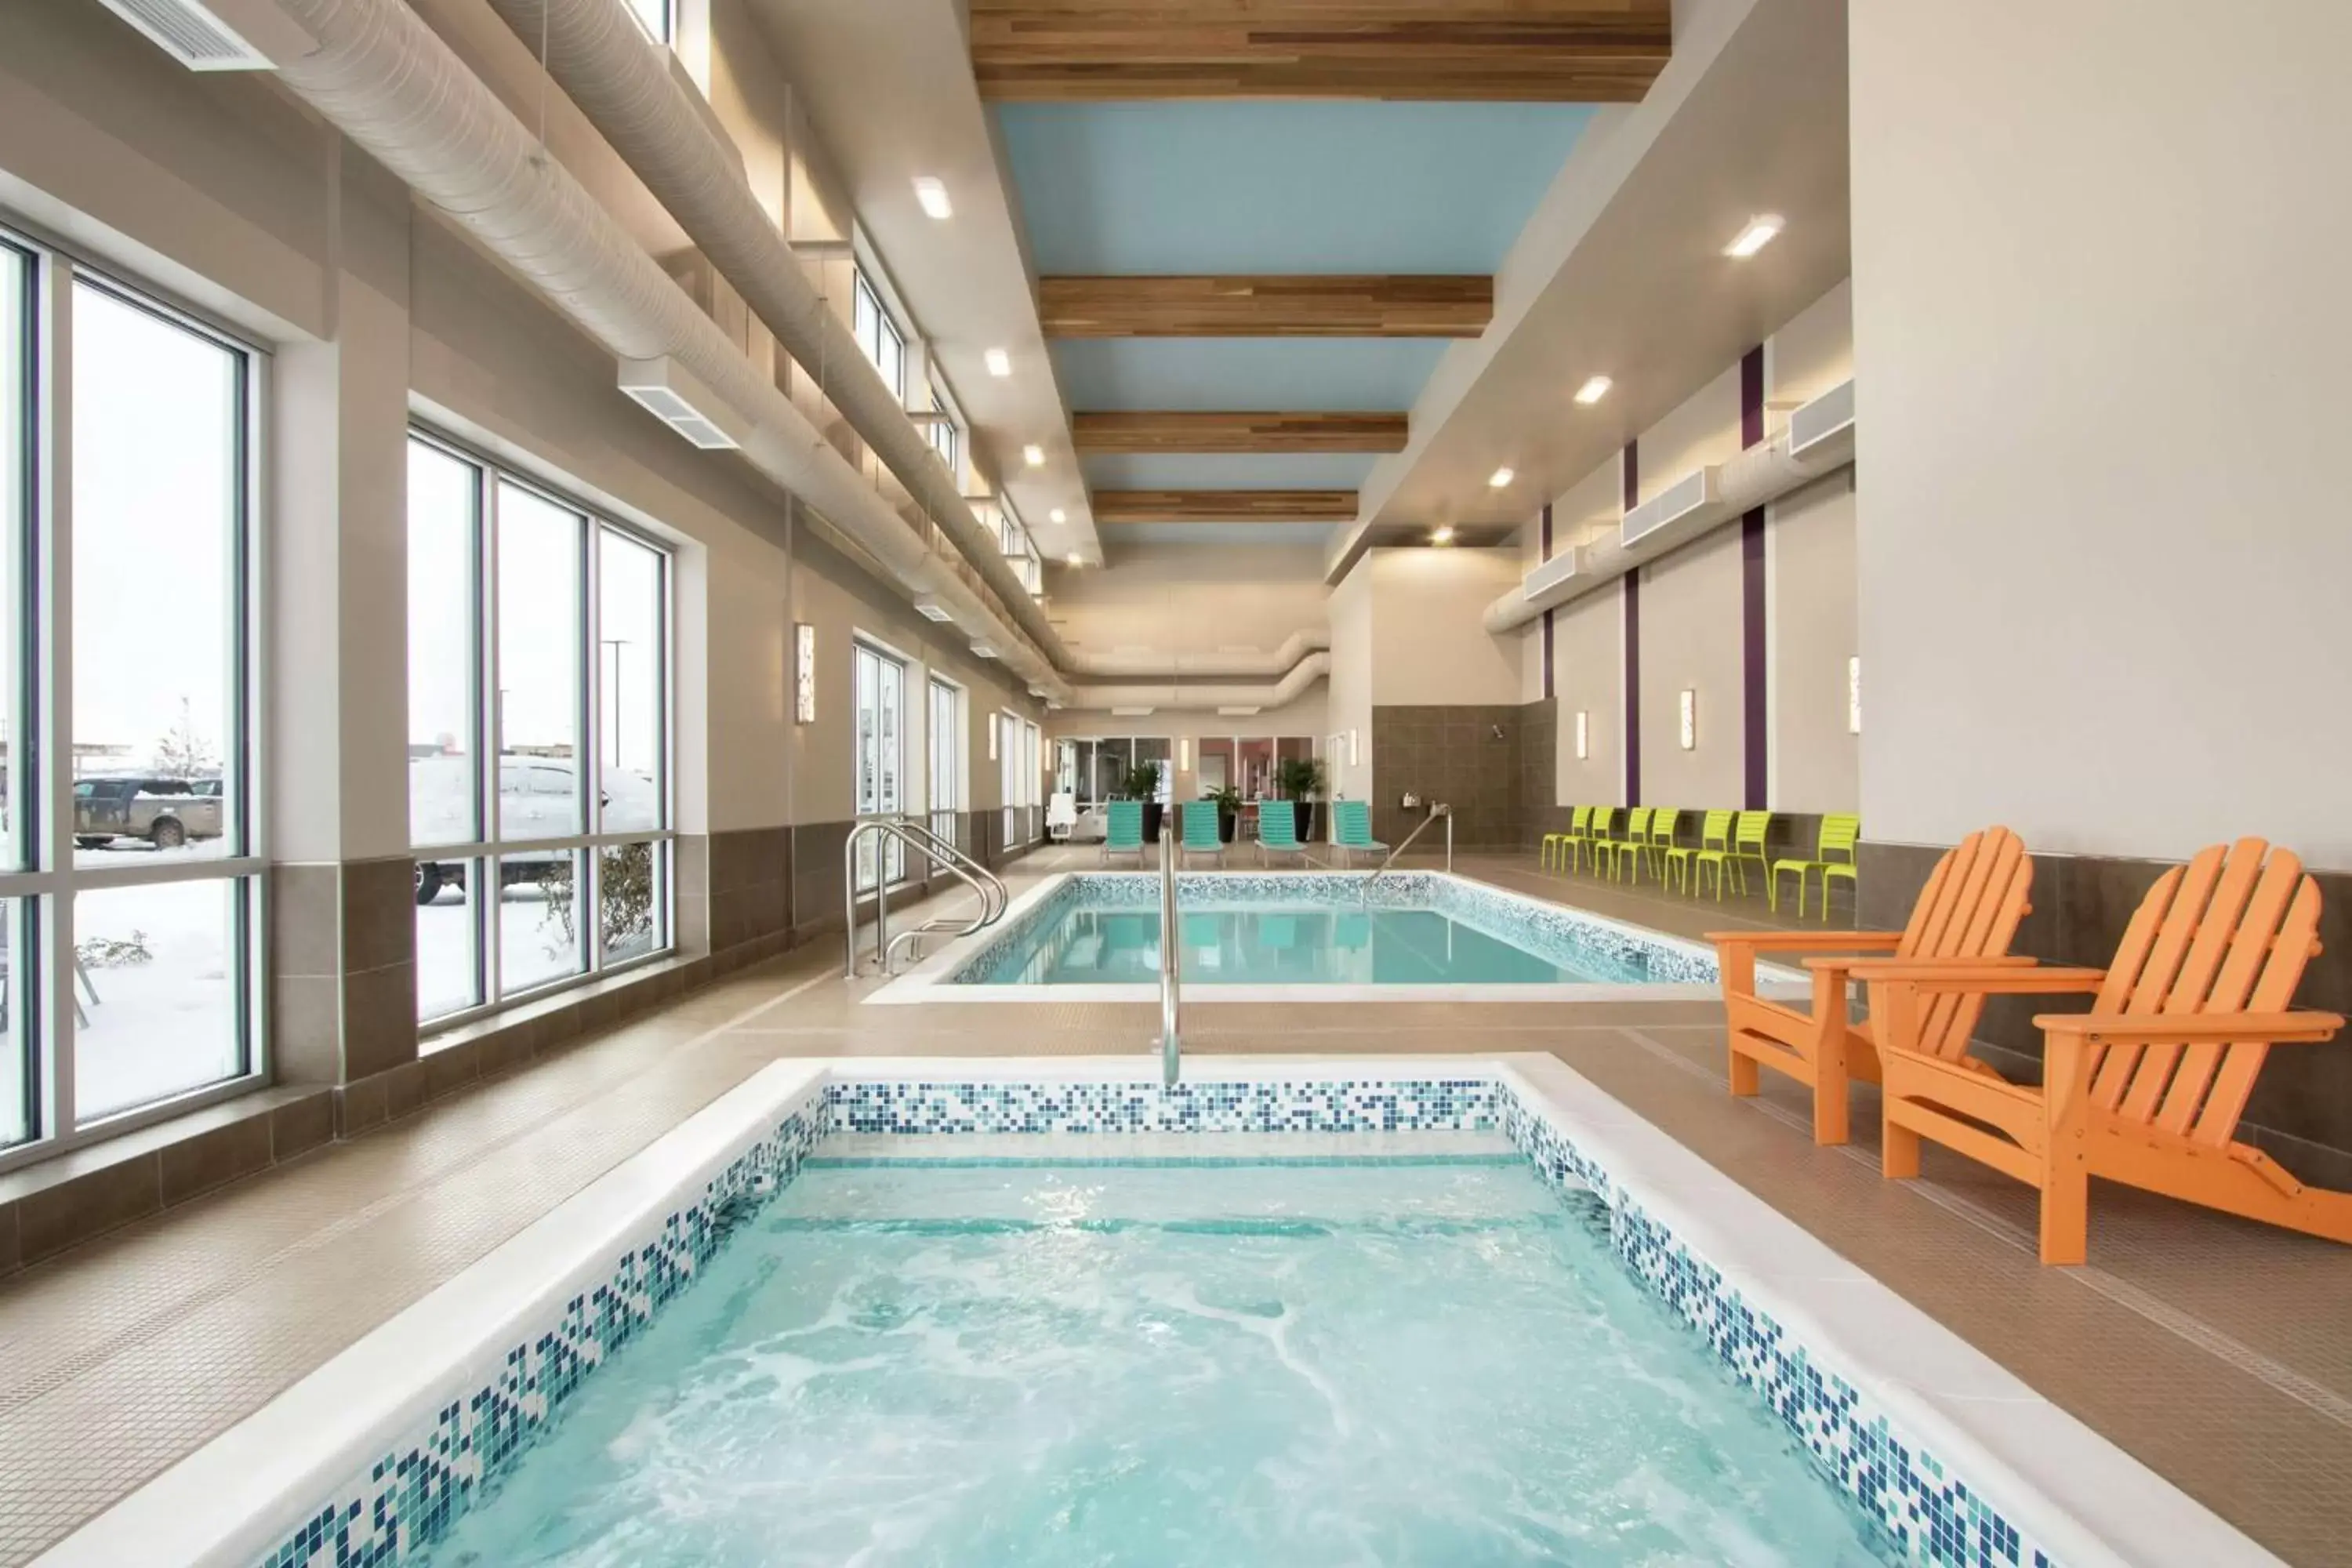 Swimming Pool in Home2 Suites by Hilton Fort St. John